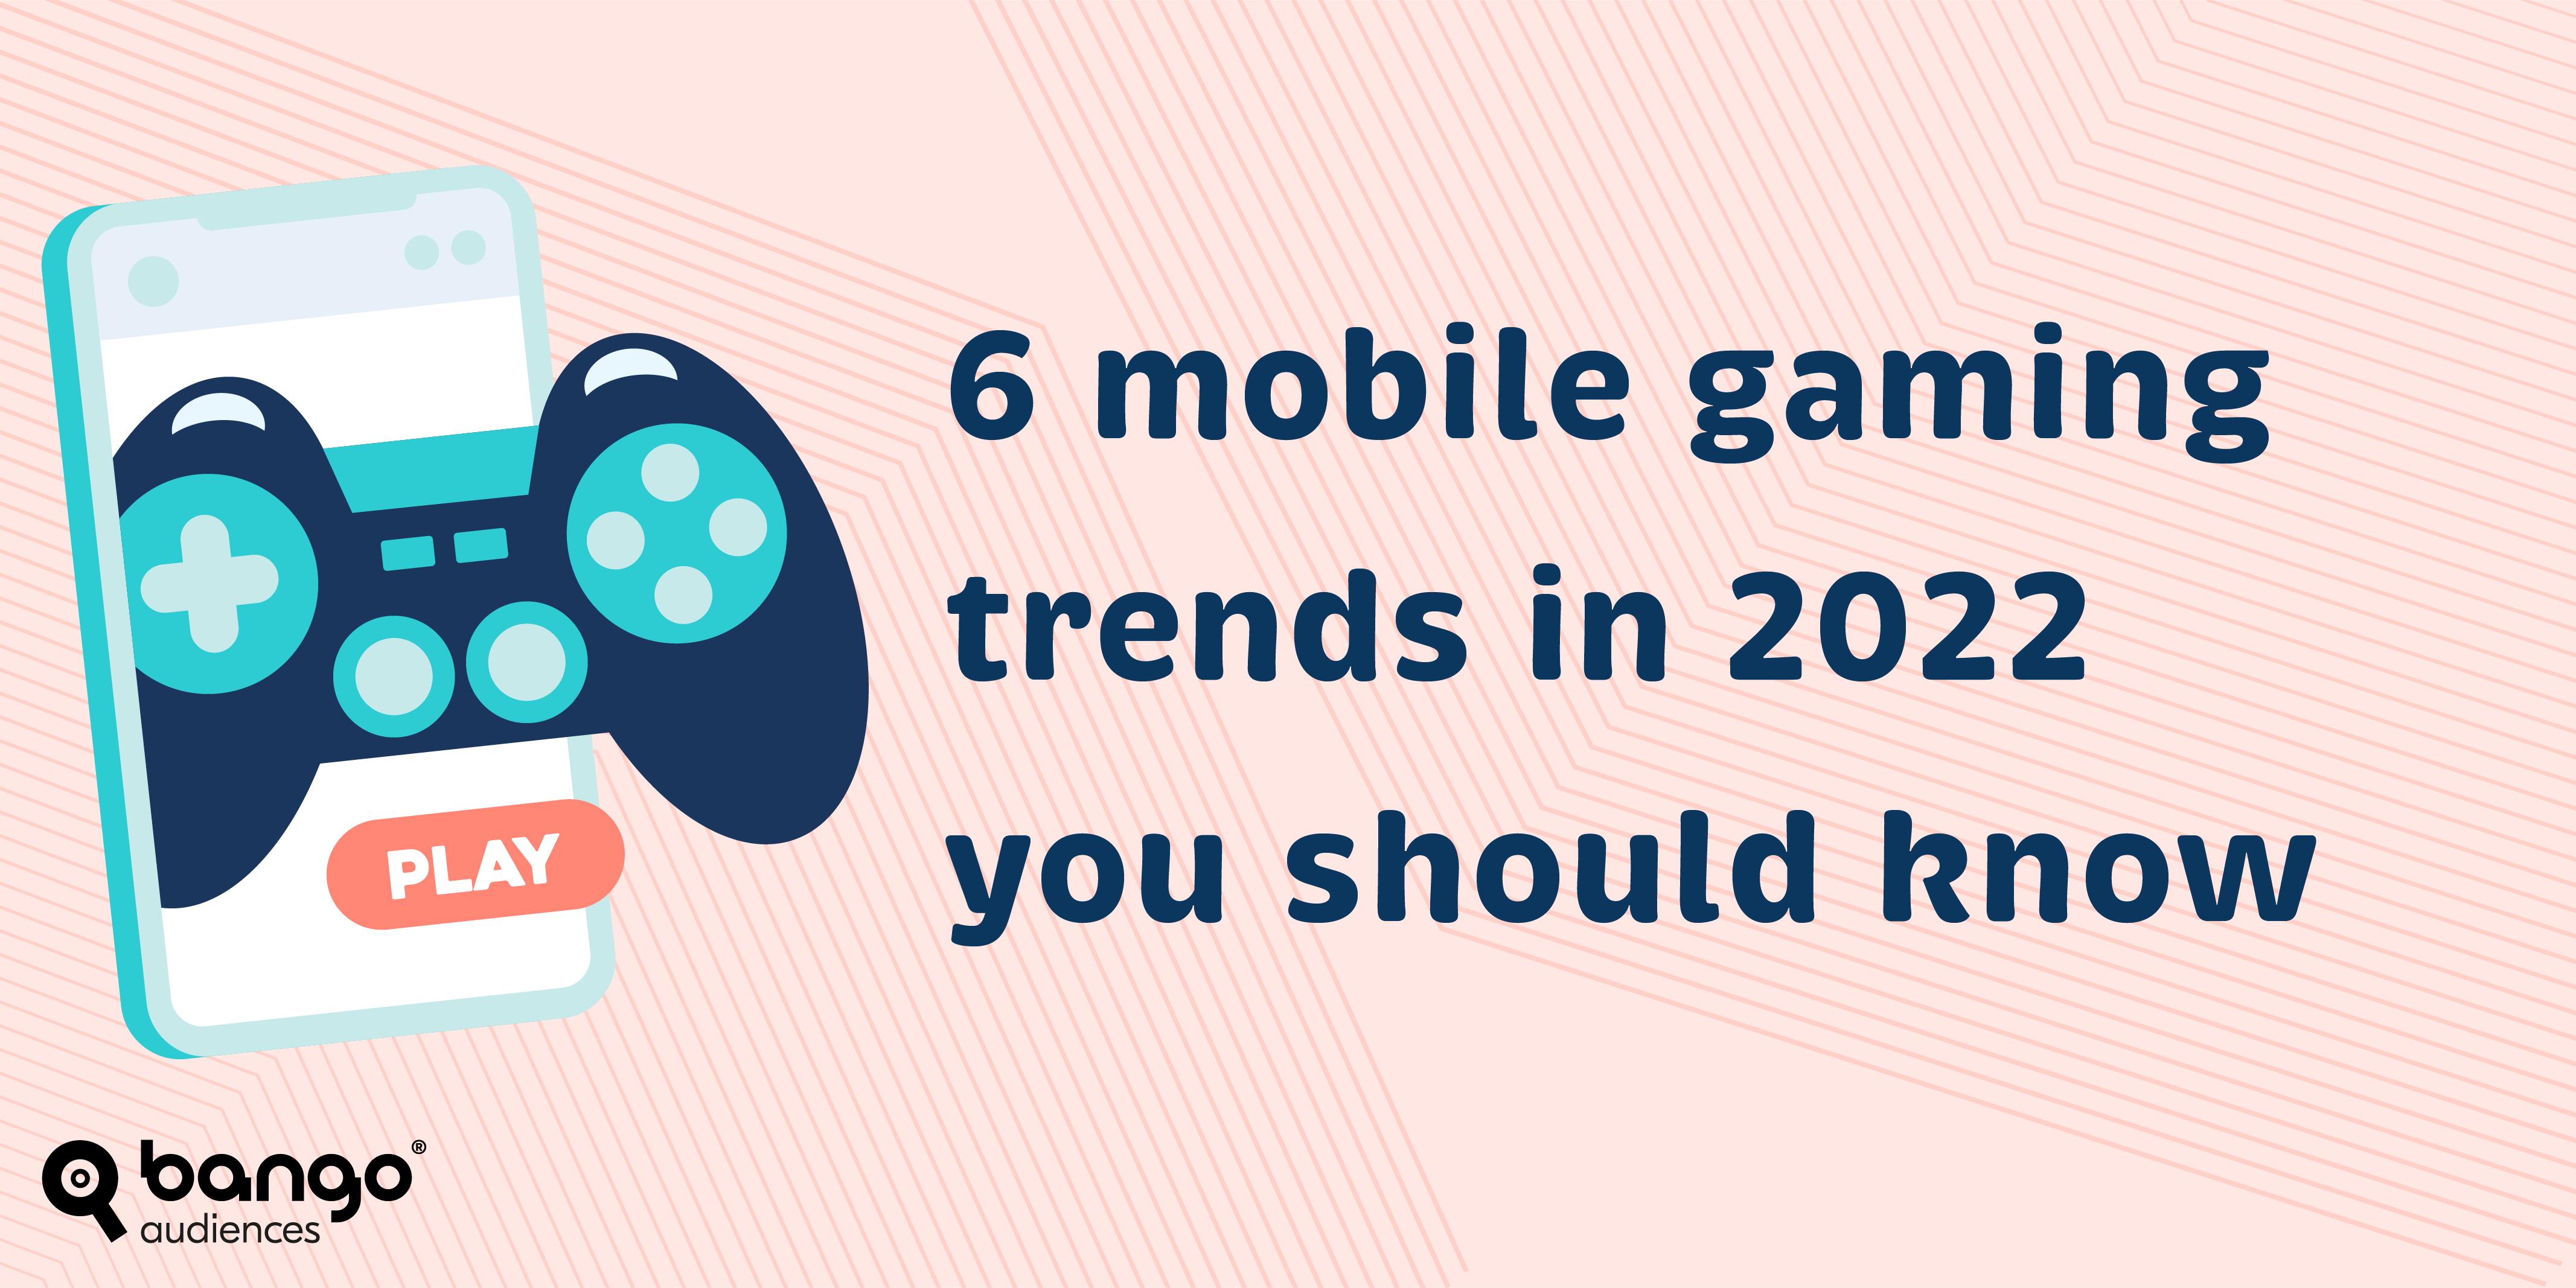 Image for 6 mobile gaming trends in 2022 you should know